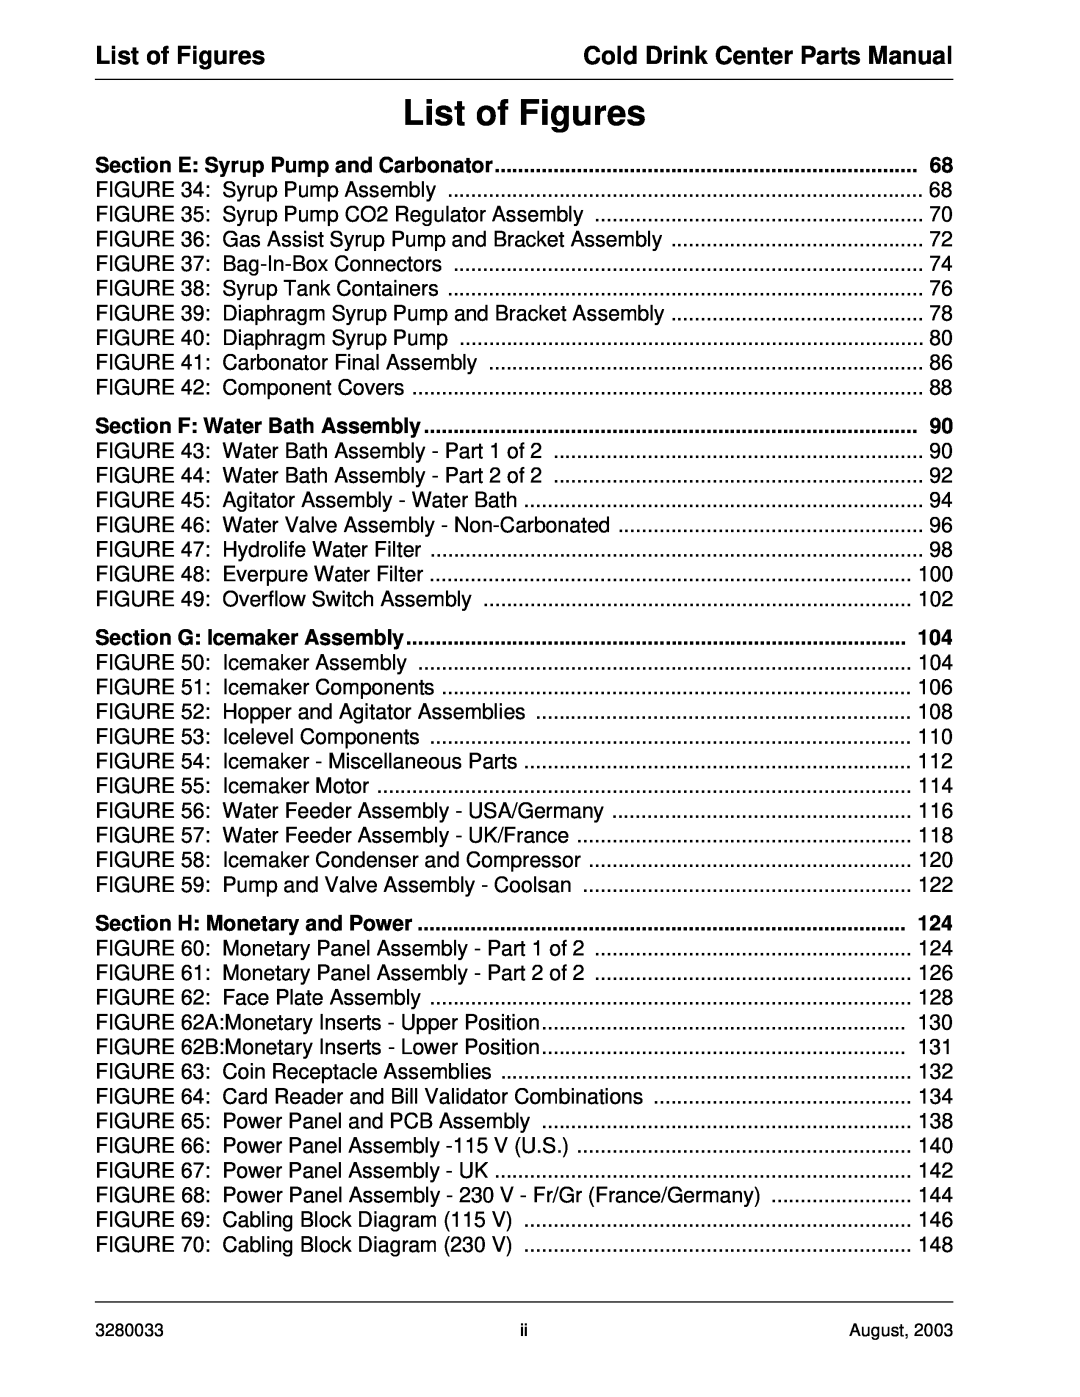 Crane Merchandising Systems 328, 327 List of Figures, Cold Drink Center Parts Manual, Section E Syrup Pump and Carbonator 